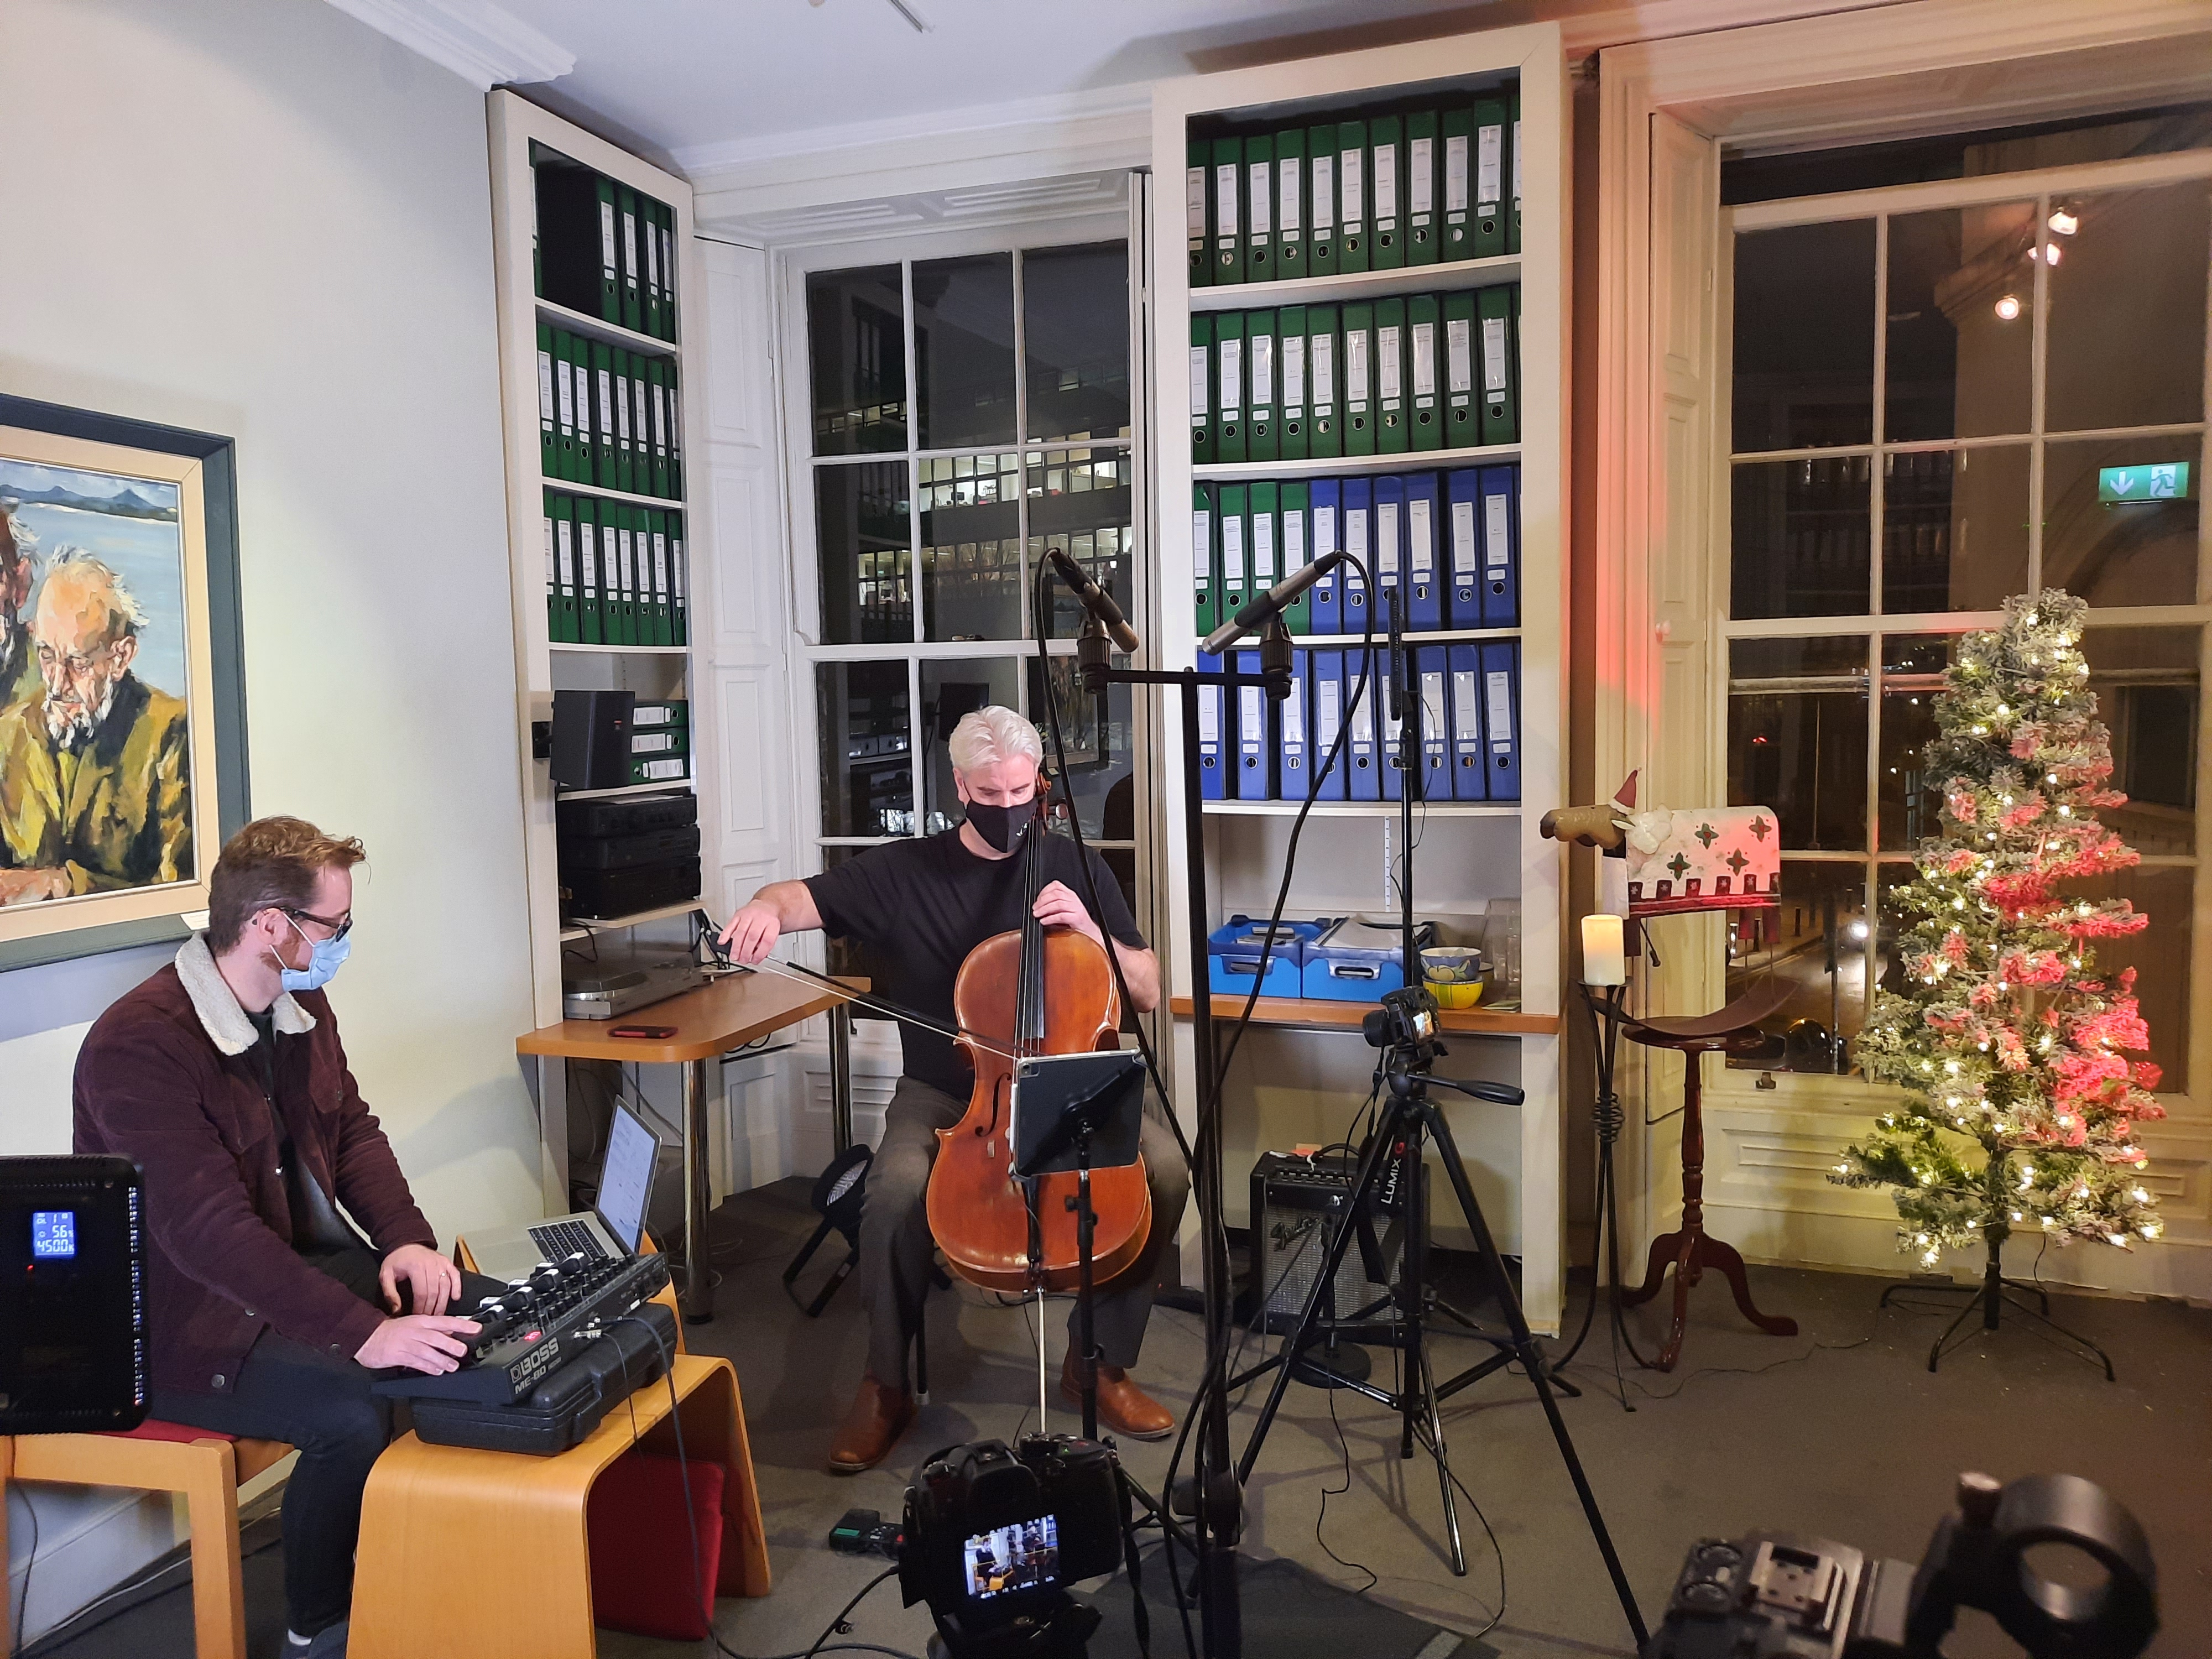 Anselm McDonnell (CMC Composer) and Martin Johnson (Principal Cellist with the RTE National Symphony Orchestra) performing 'Three Words for Light' at the Contemporary Music Centre in Dublin.